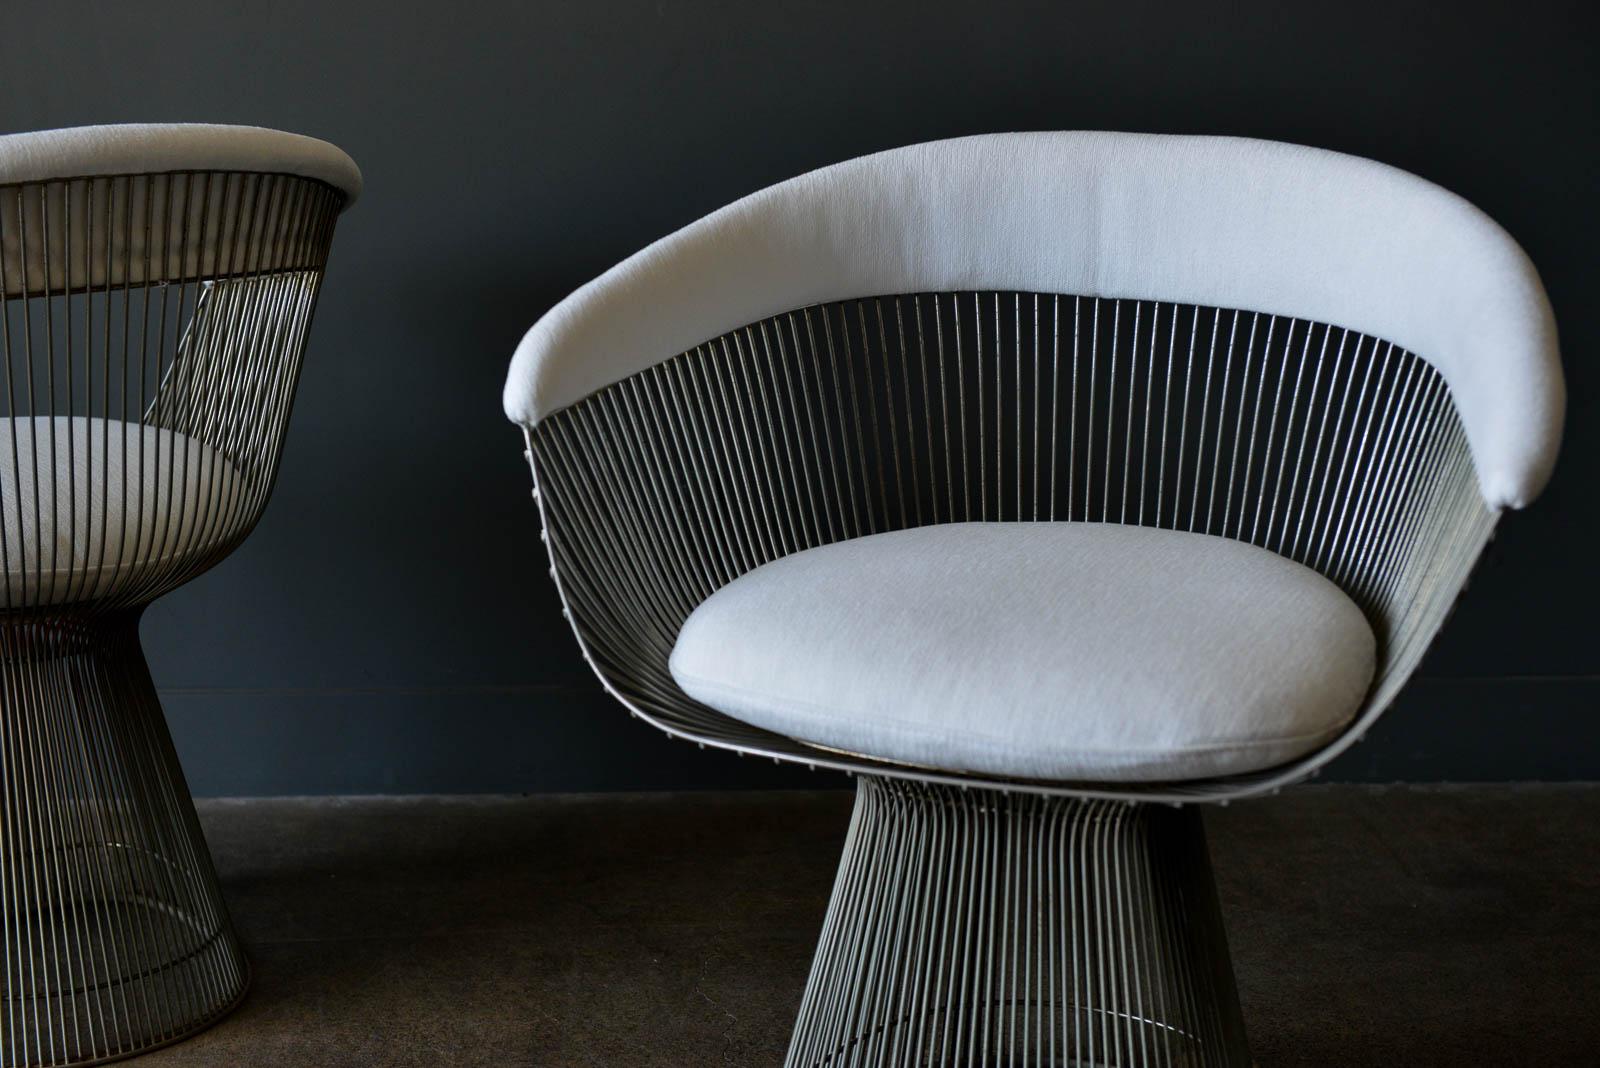 Plated Pair of Warren Platner for Knoll Armchairs, ca. 1970